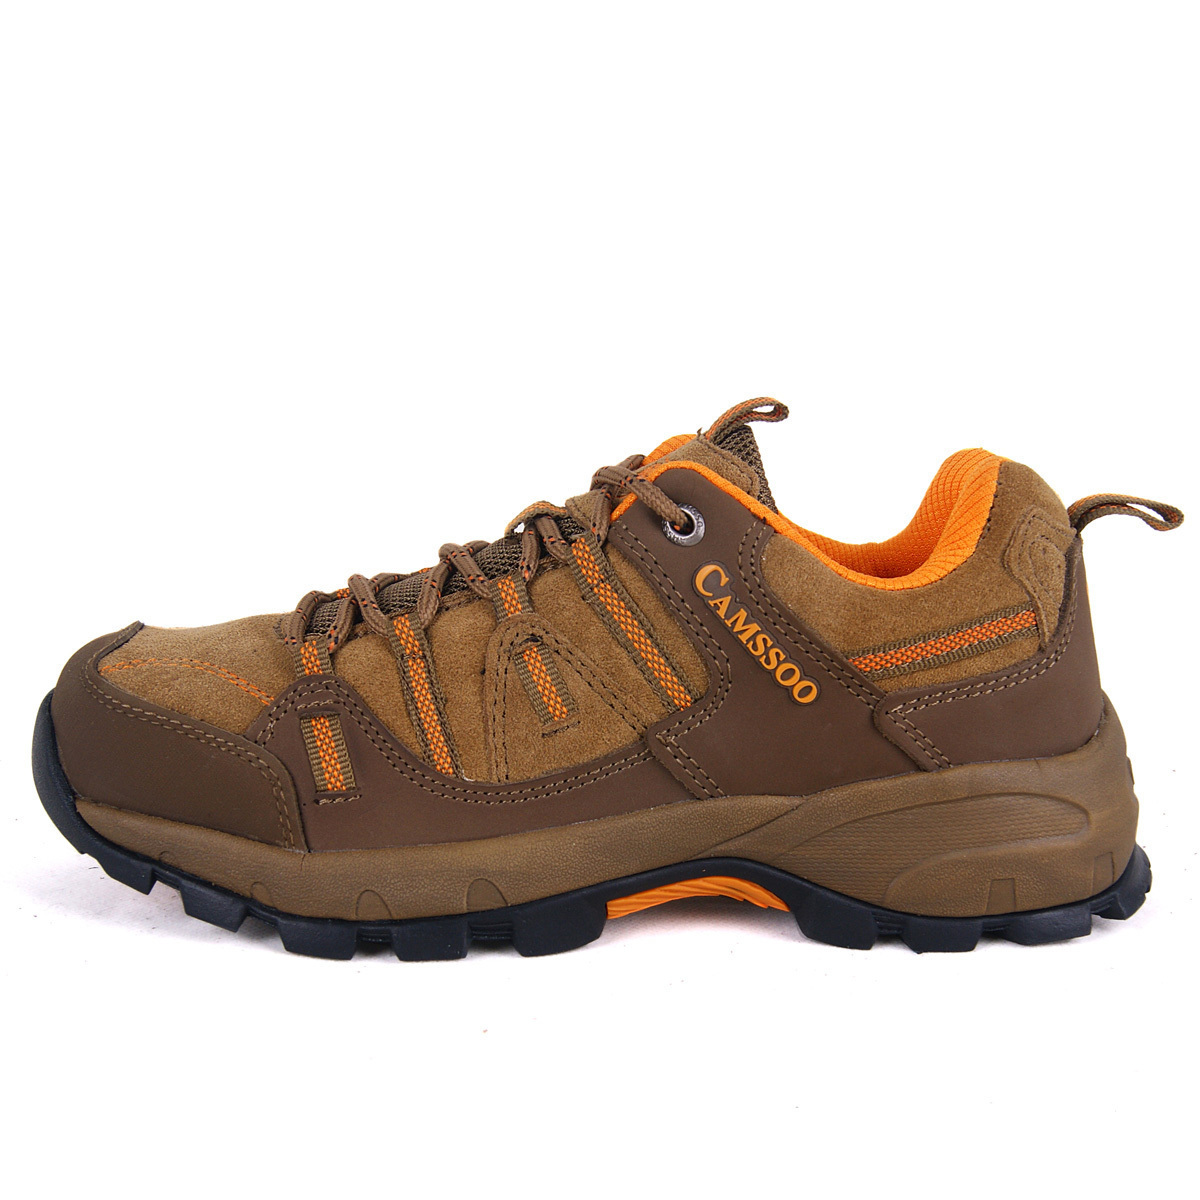 ... walking shoes platform sports shoes-inHiking Shoes from Sports